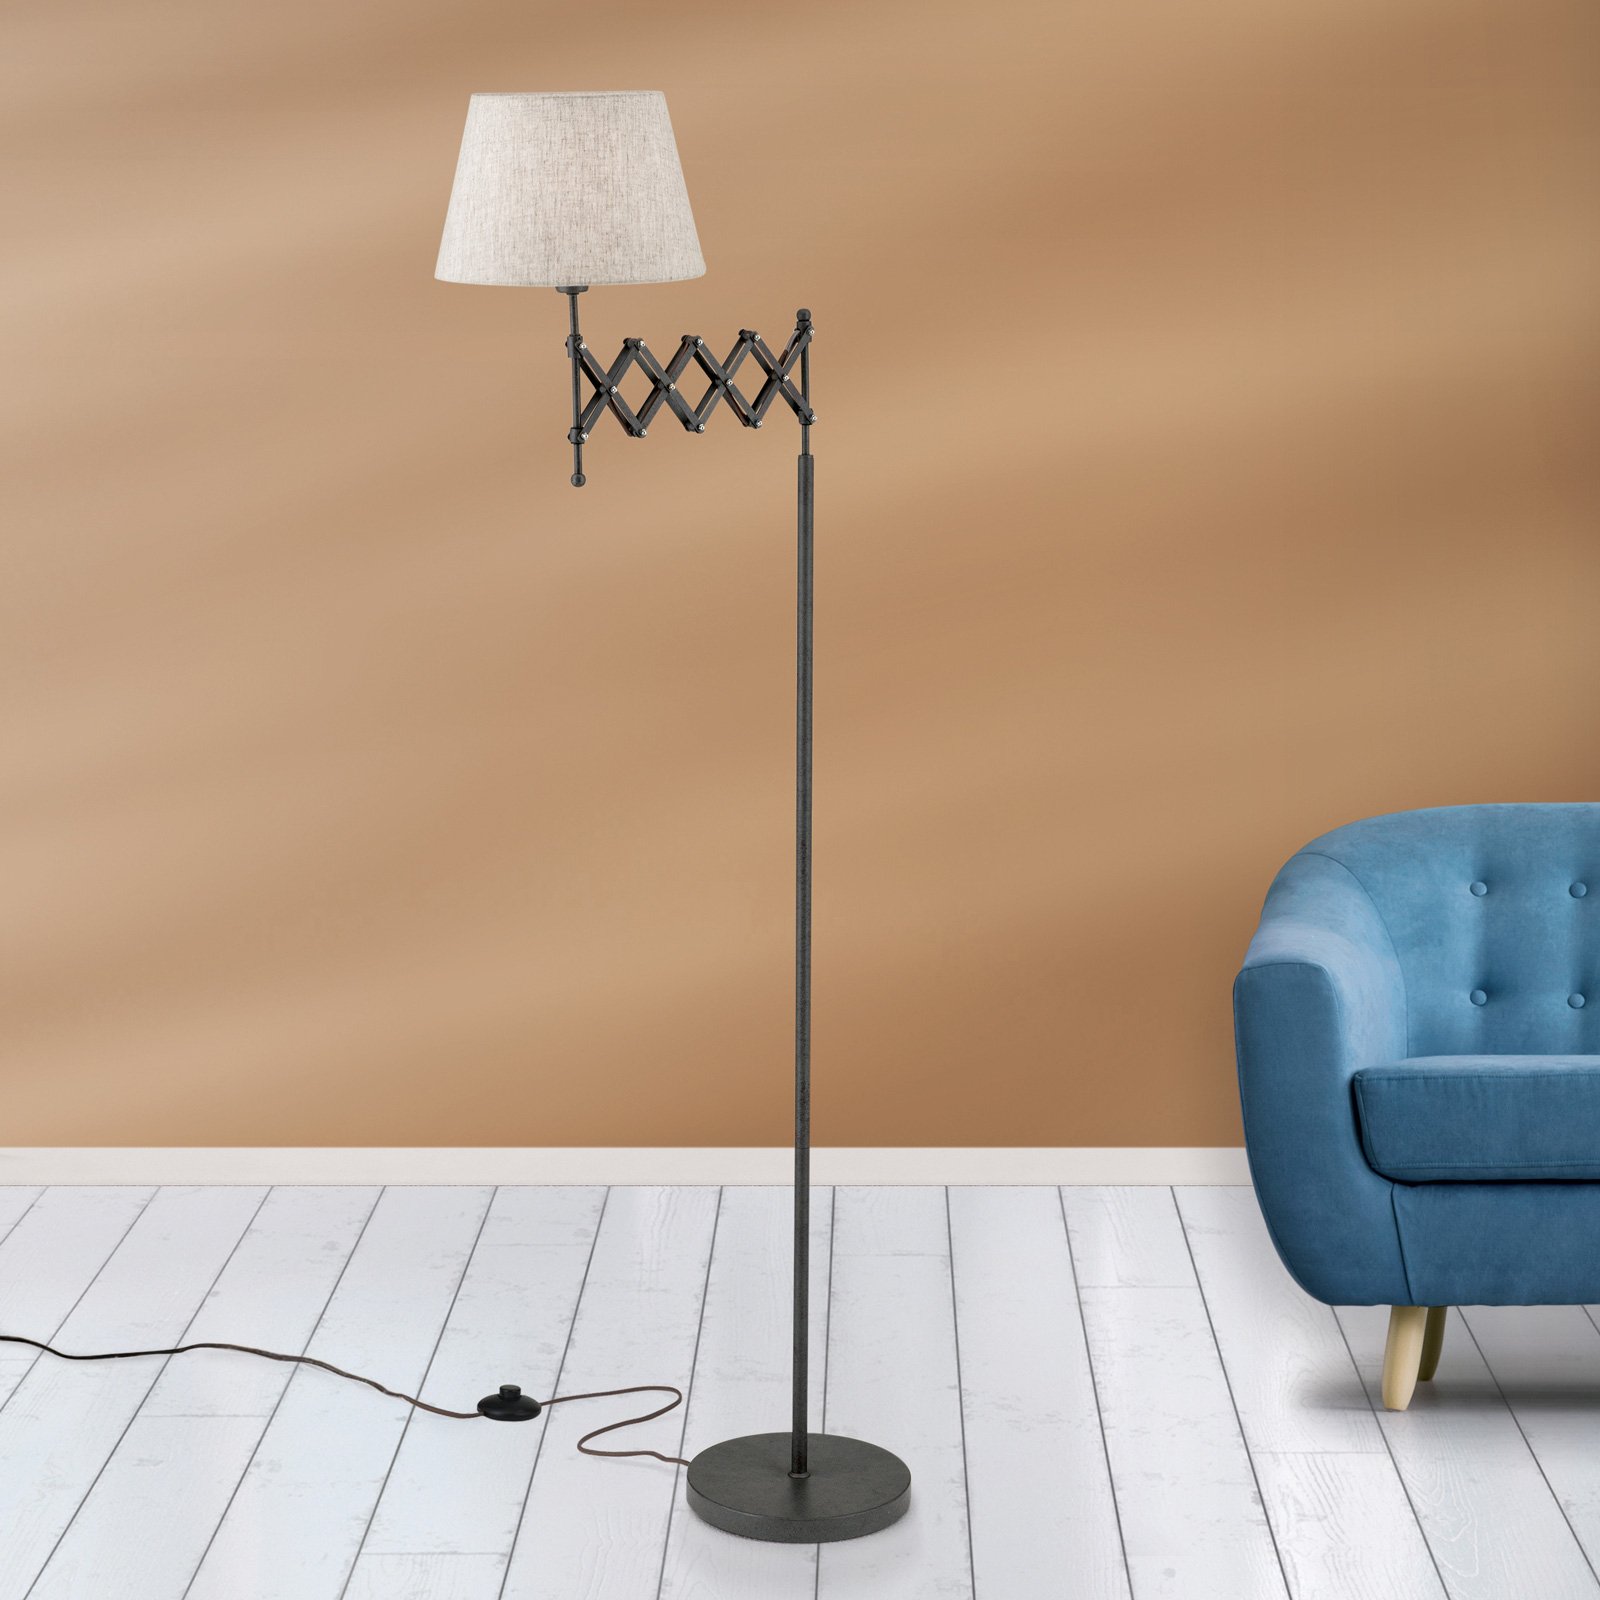 Factory floor lamp with linen lampshade